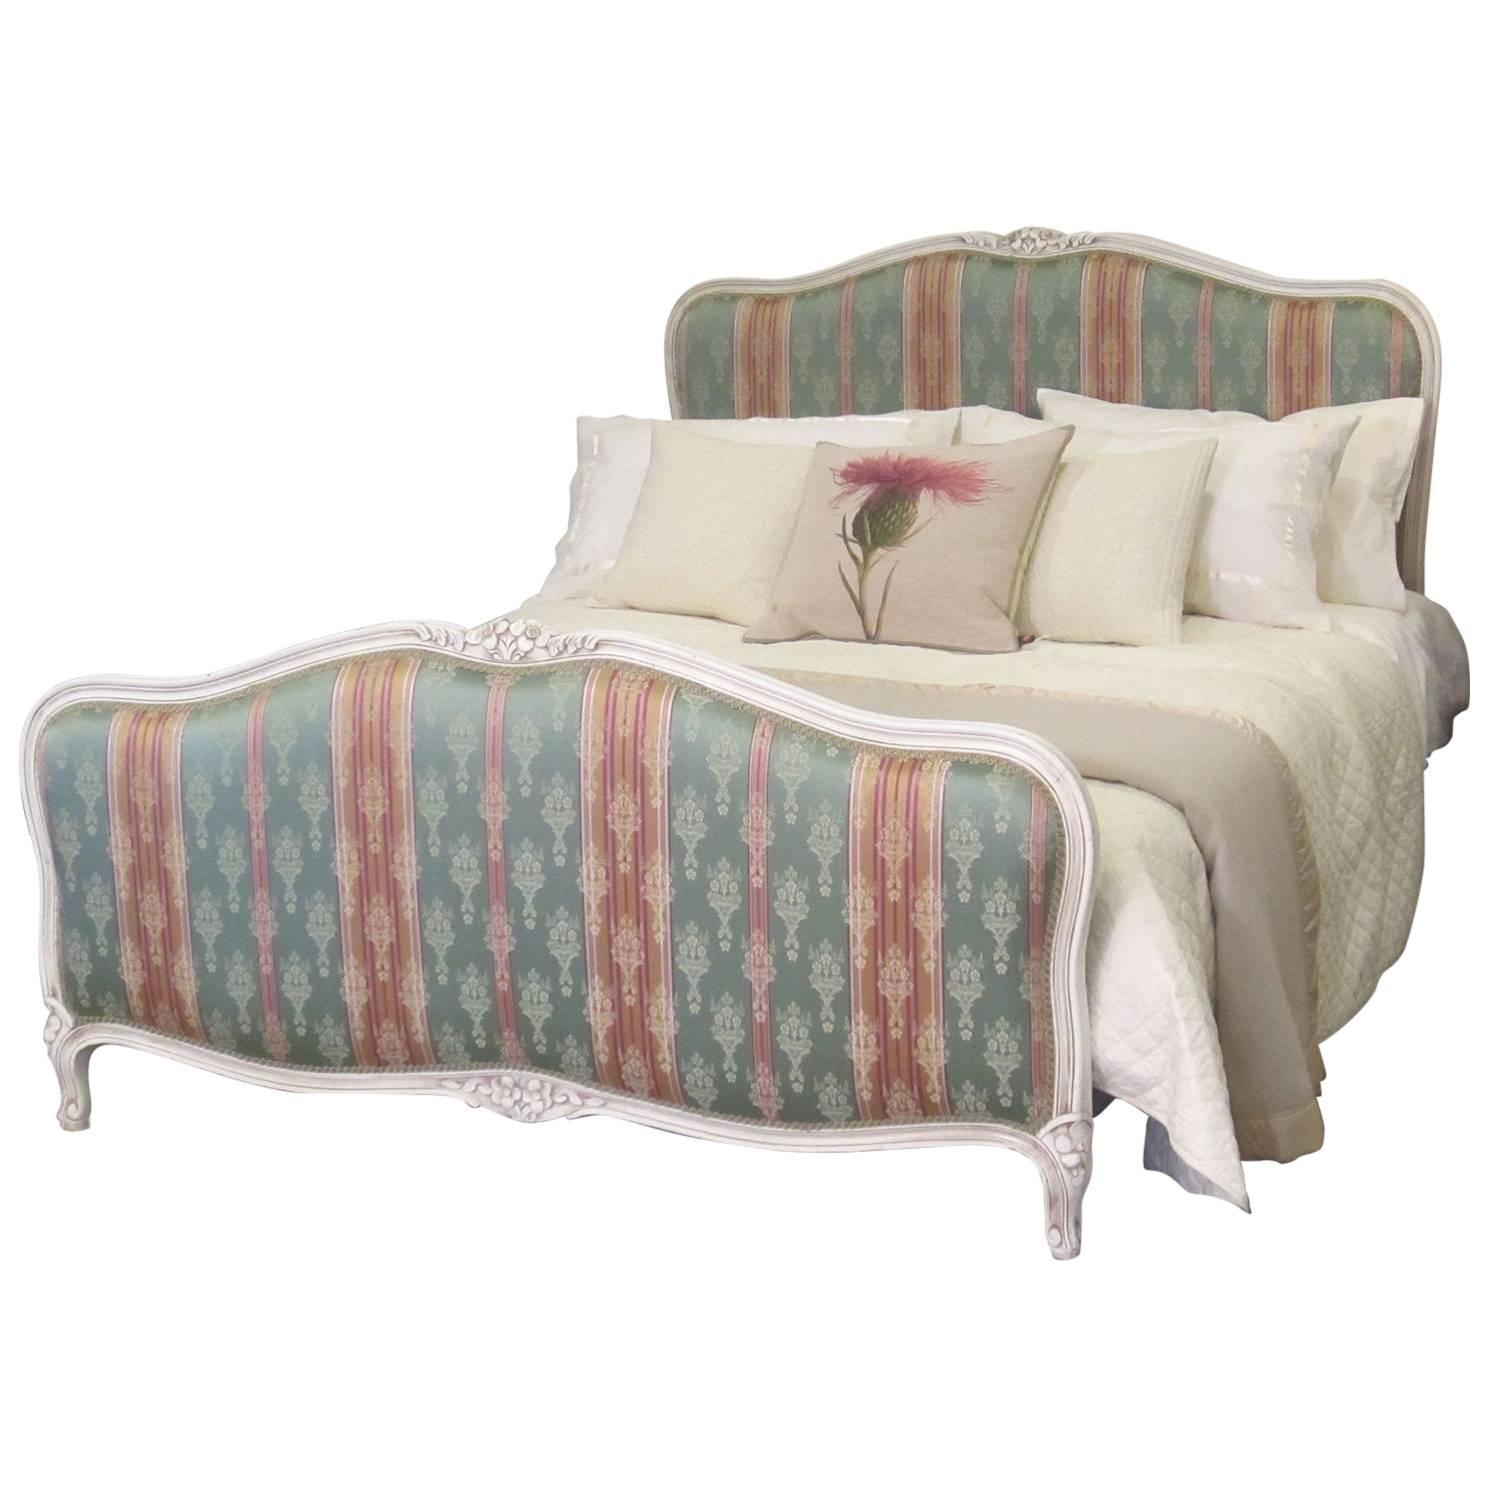 Upholstered White Painted Frame Bed, WK67